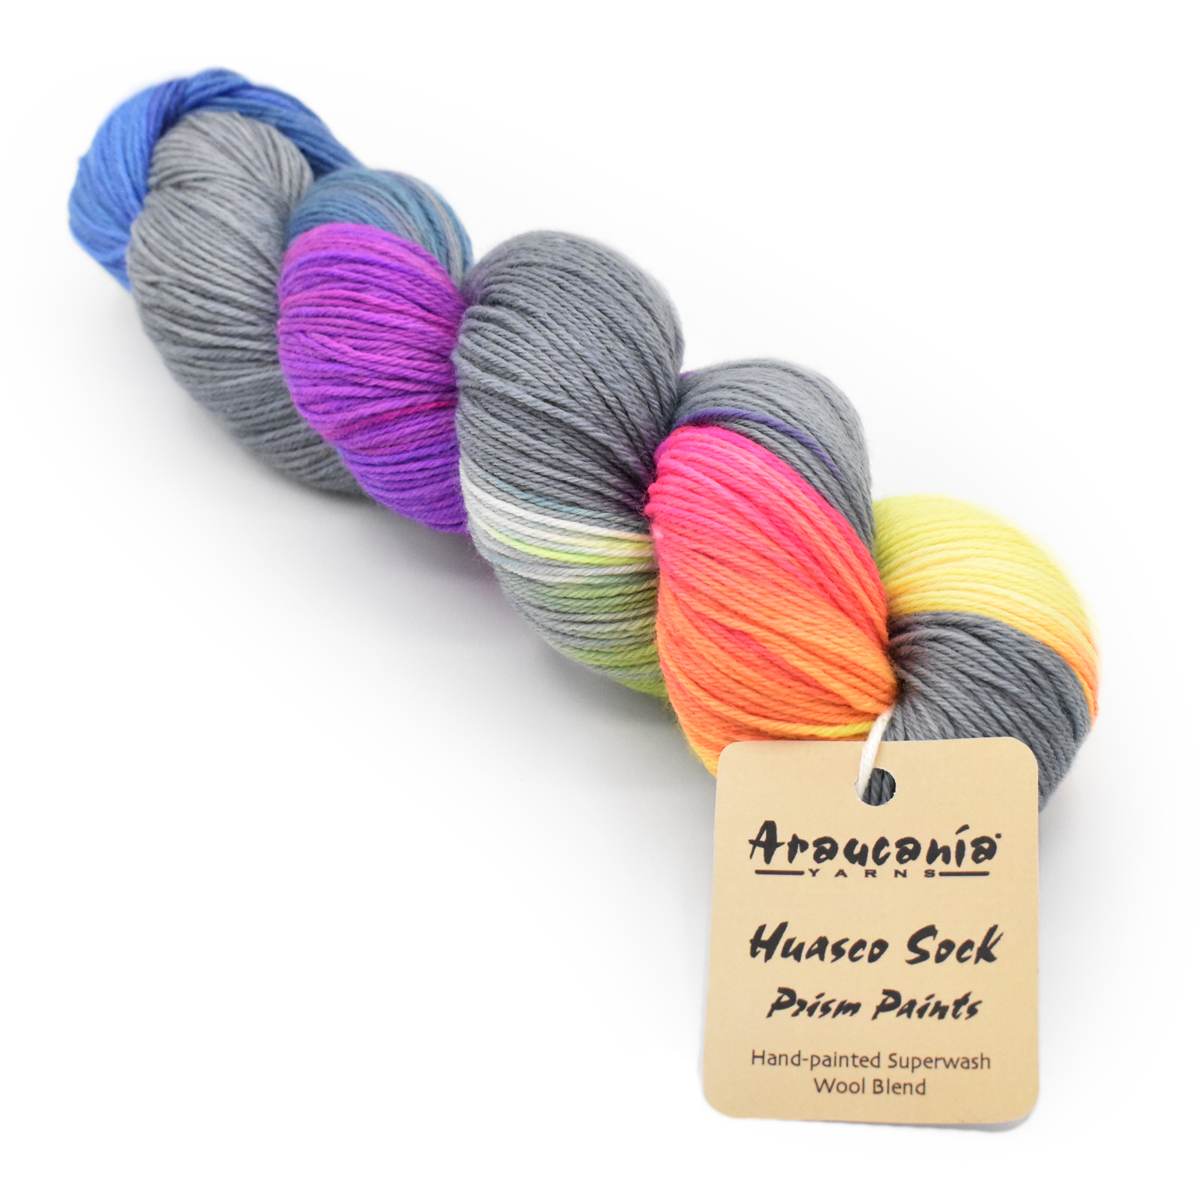 a skein of Huasco Sock Prism Paints